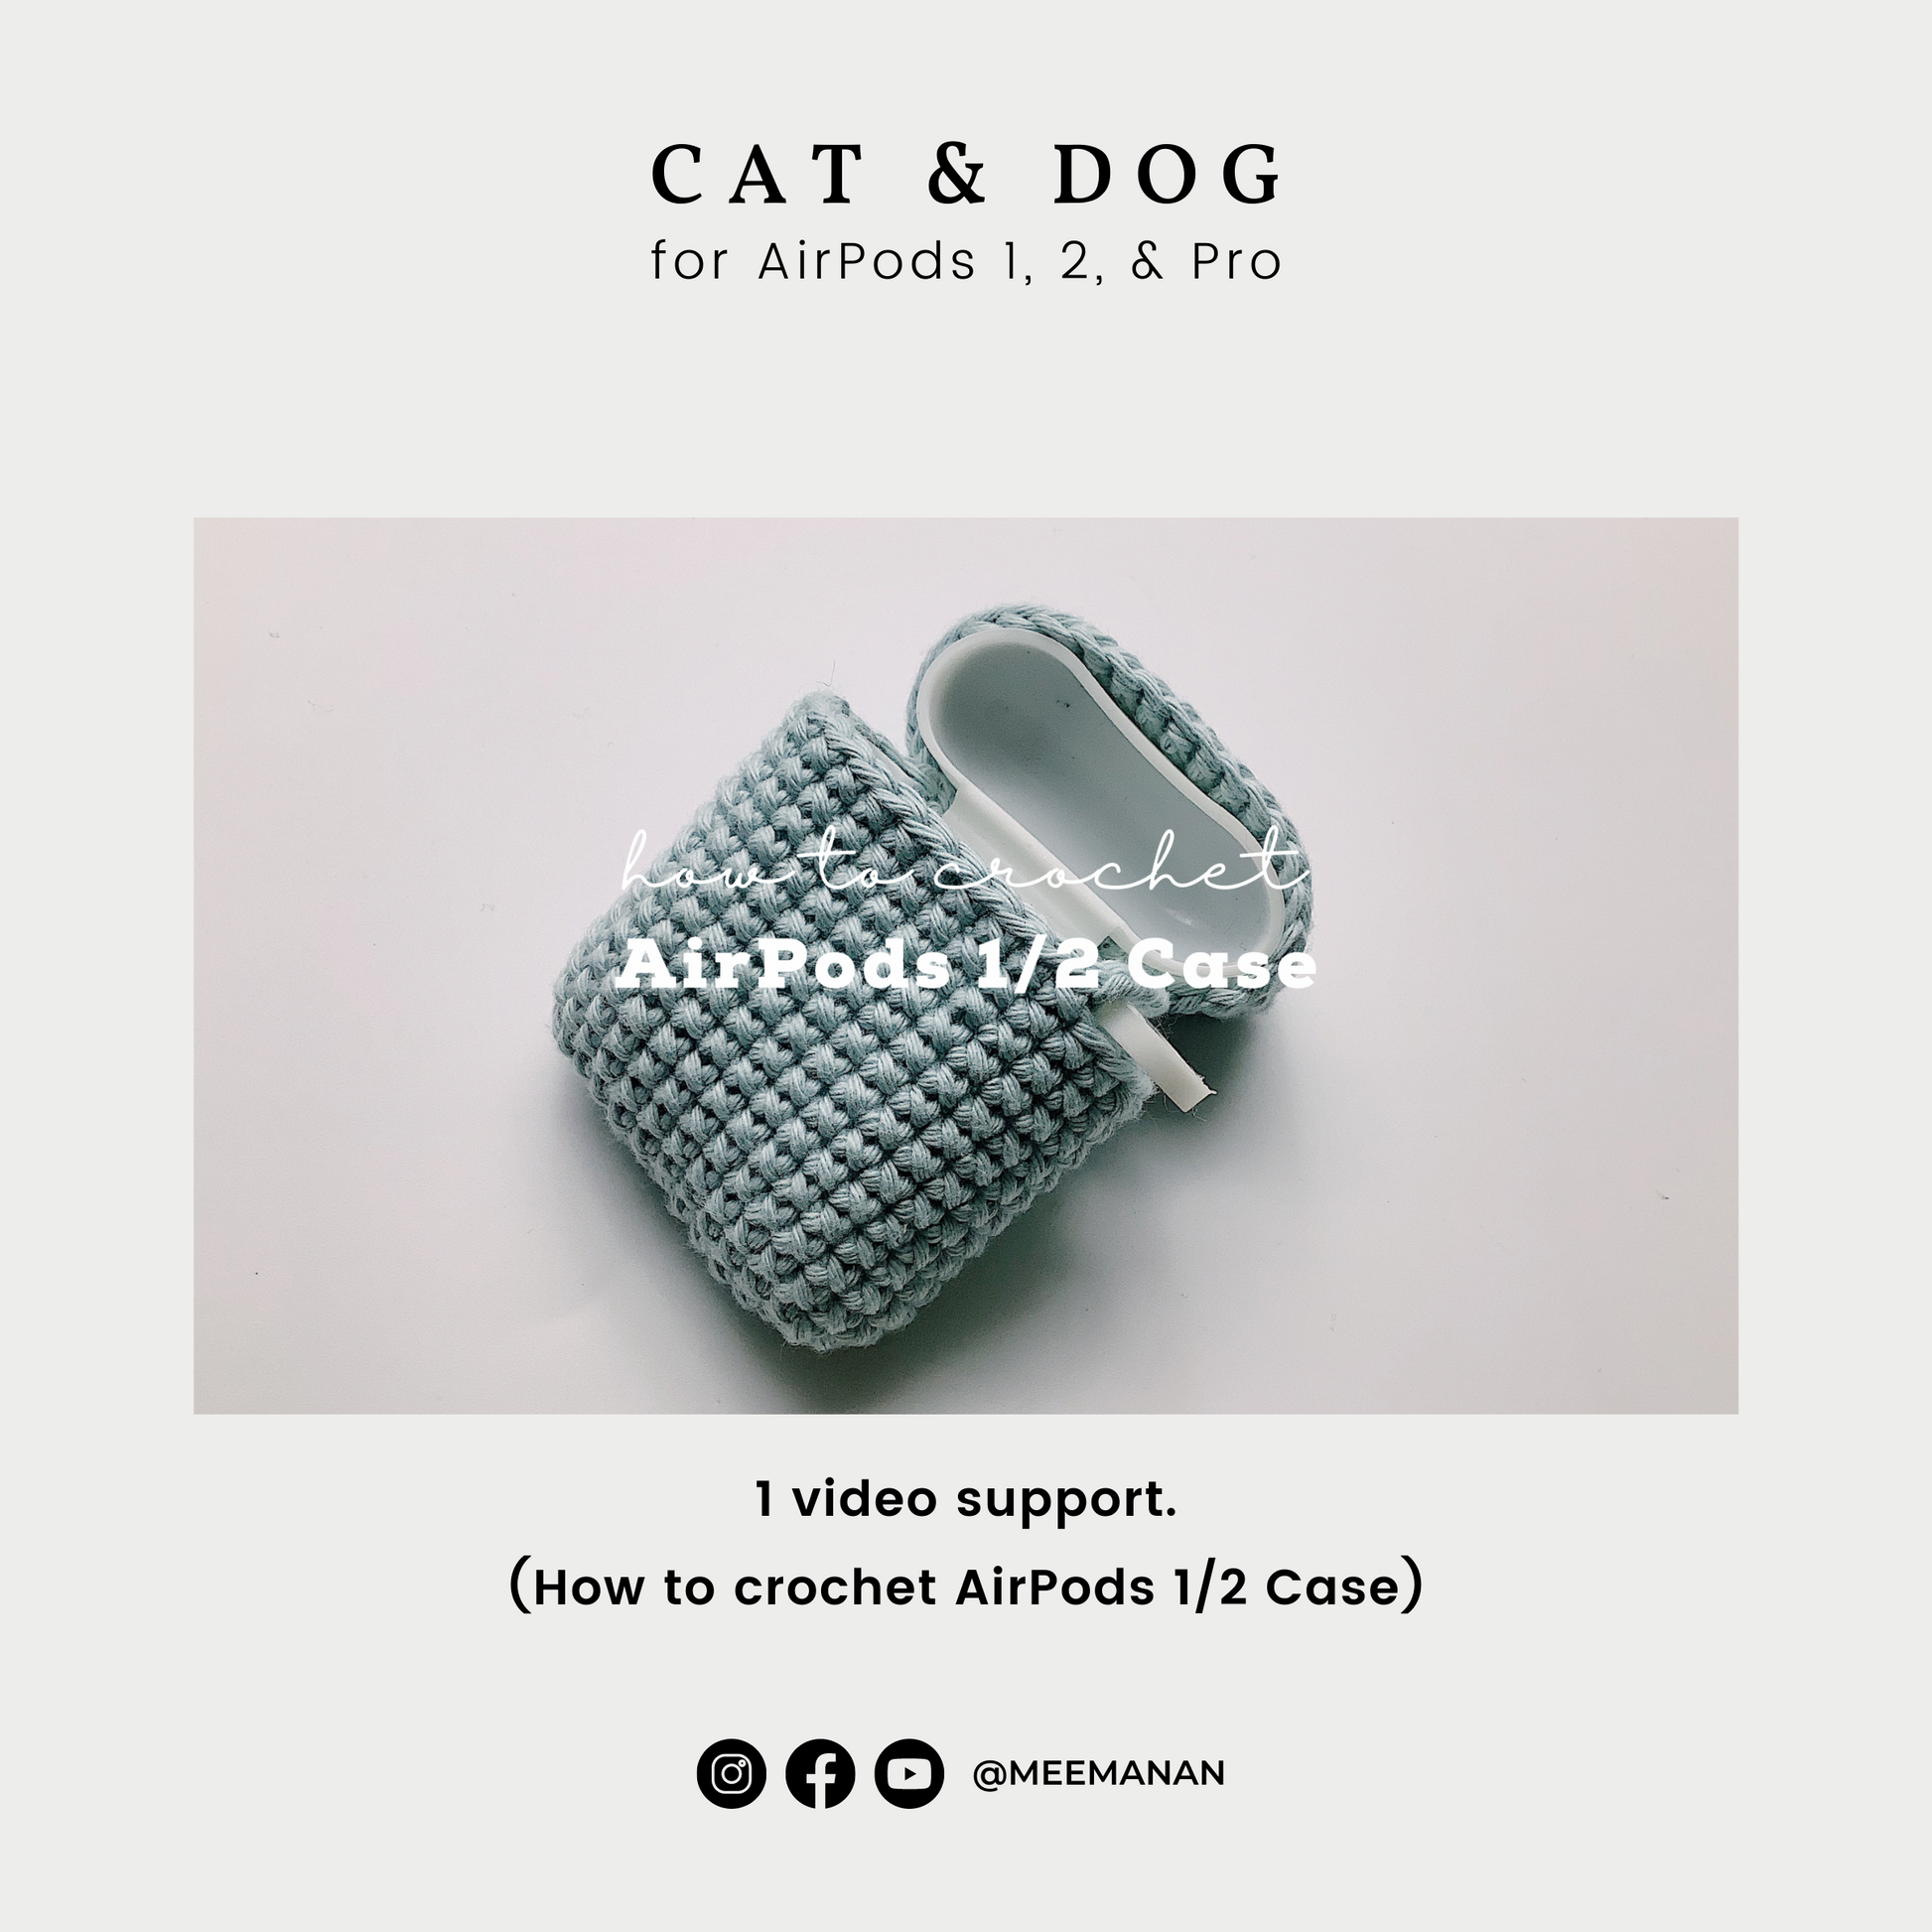 Ravelry: Cat & Dog Airpods Case pattern by Meemanan